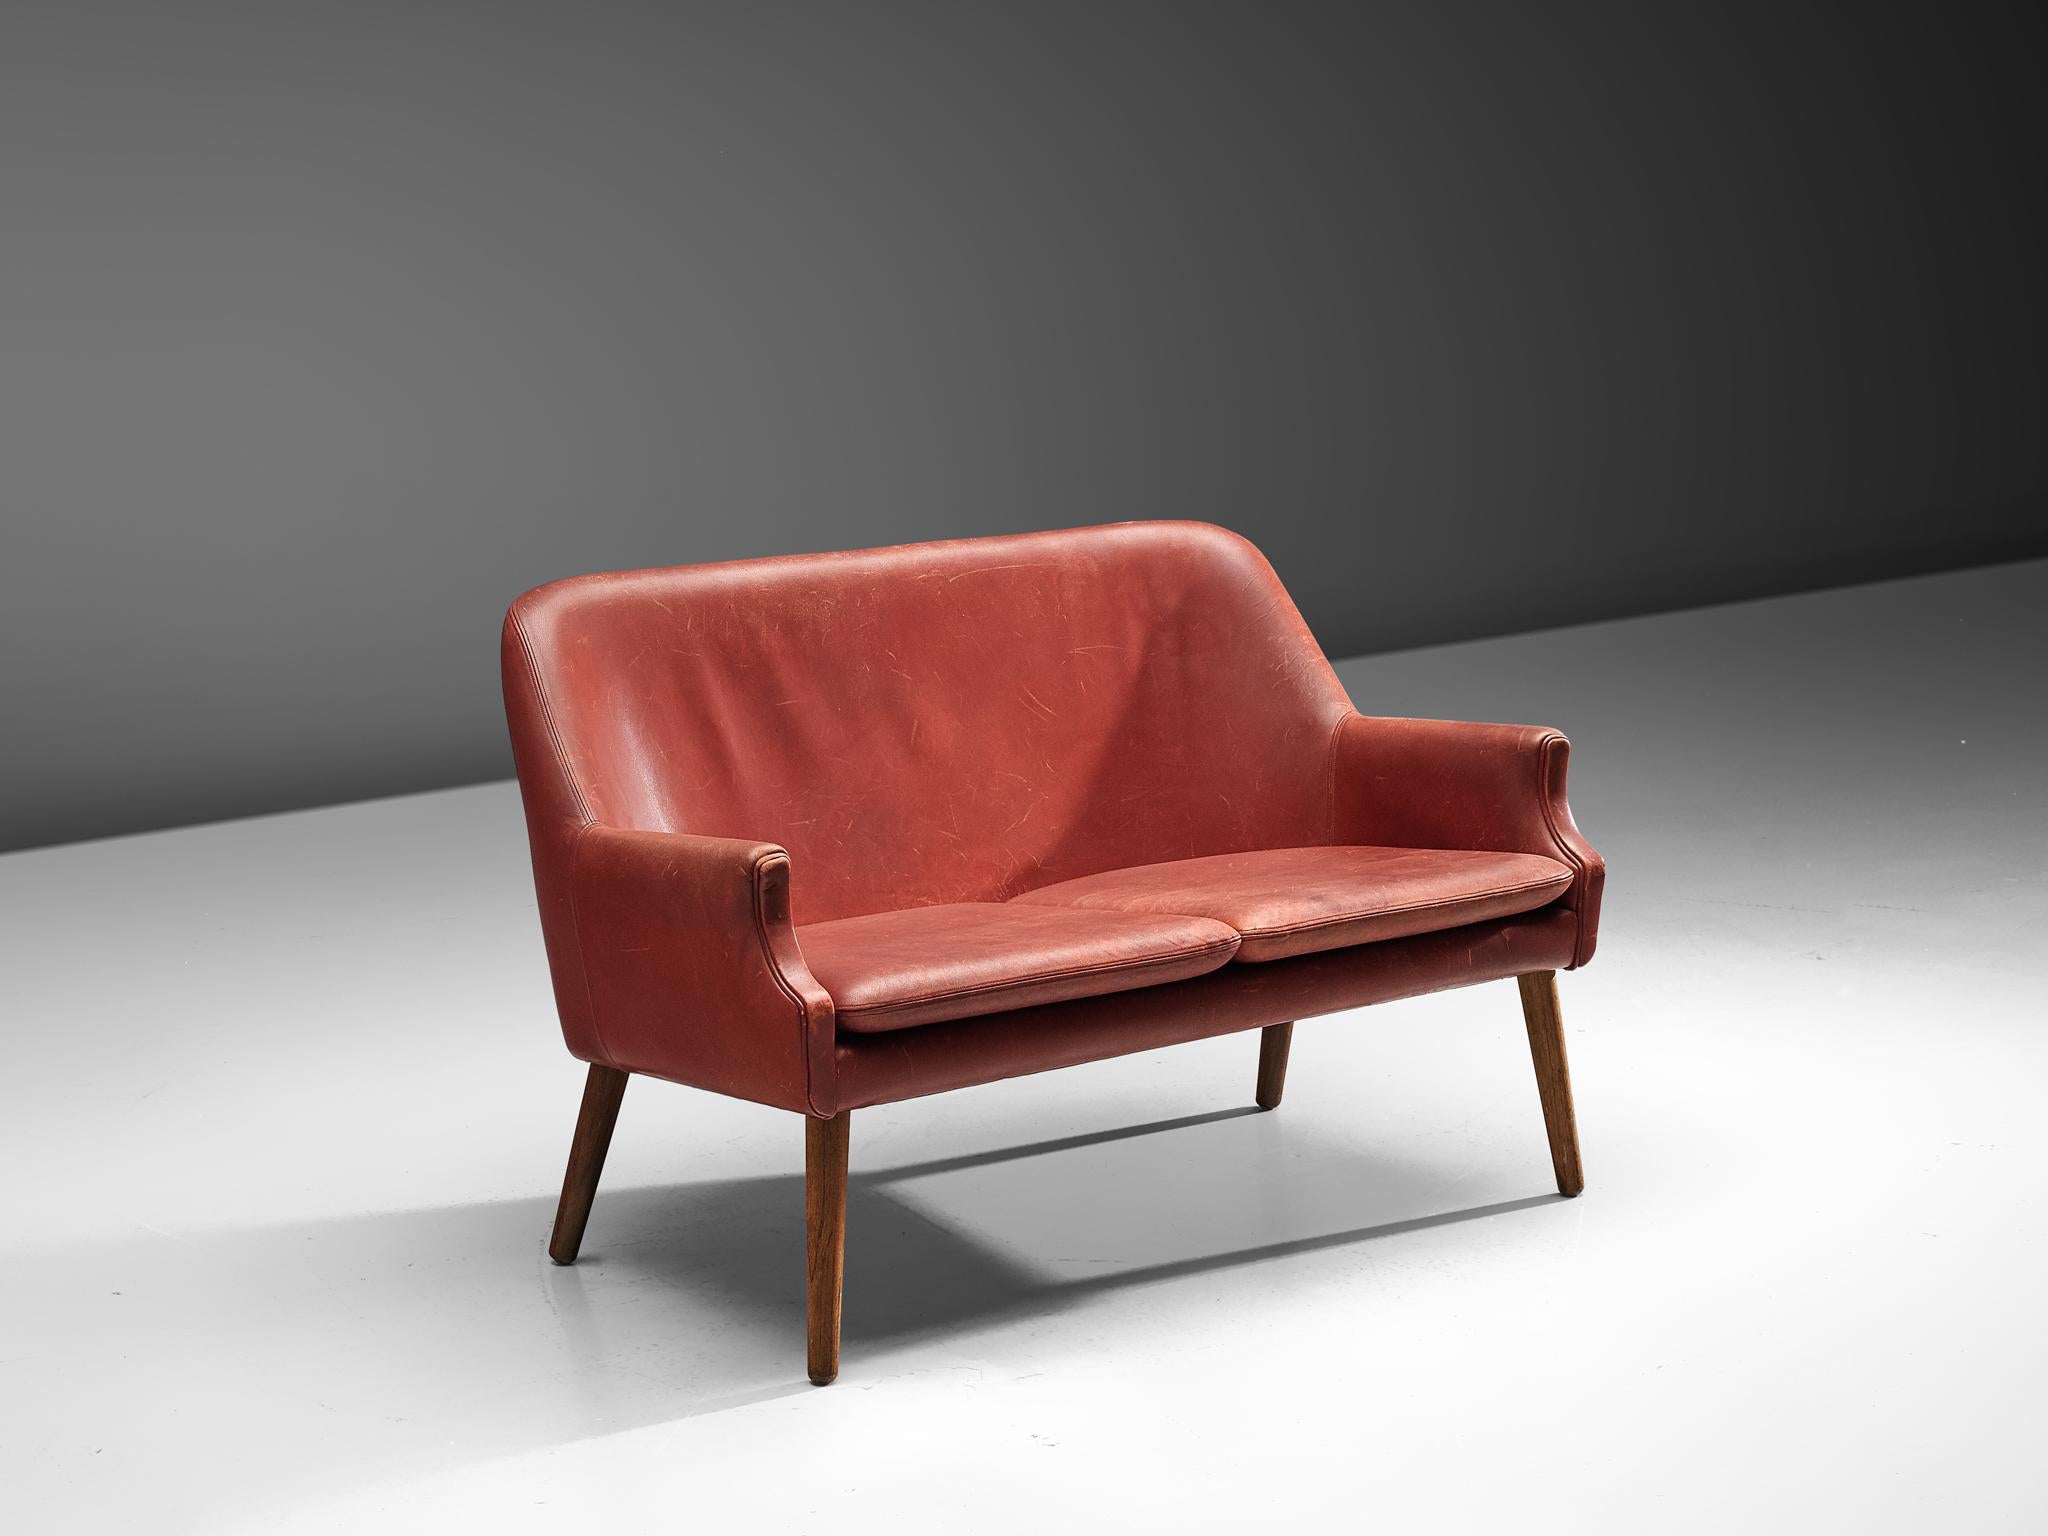 Scandinavian settee in red leather with wooden legs, 1950s.

Elegant two-seat settee in style of Danish designer Arne Vodder.
The high back is slightly curved end runs smoothly over into the slightly pointed armrests. The tapered wooden legs provide